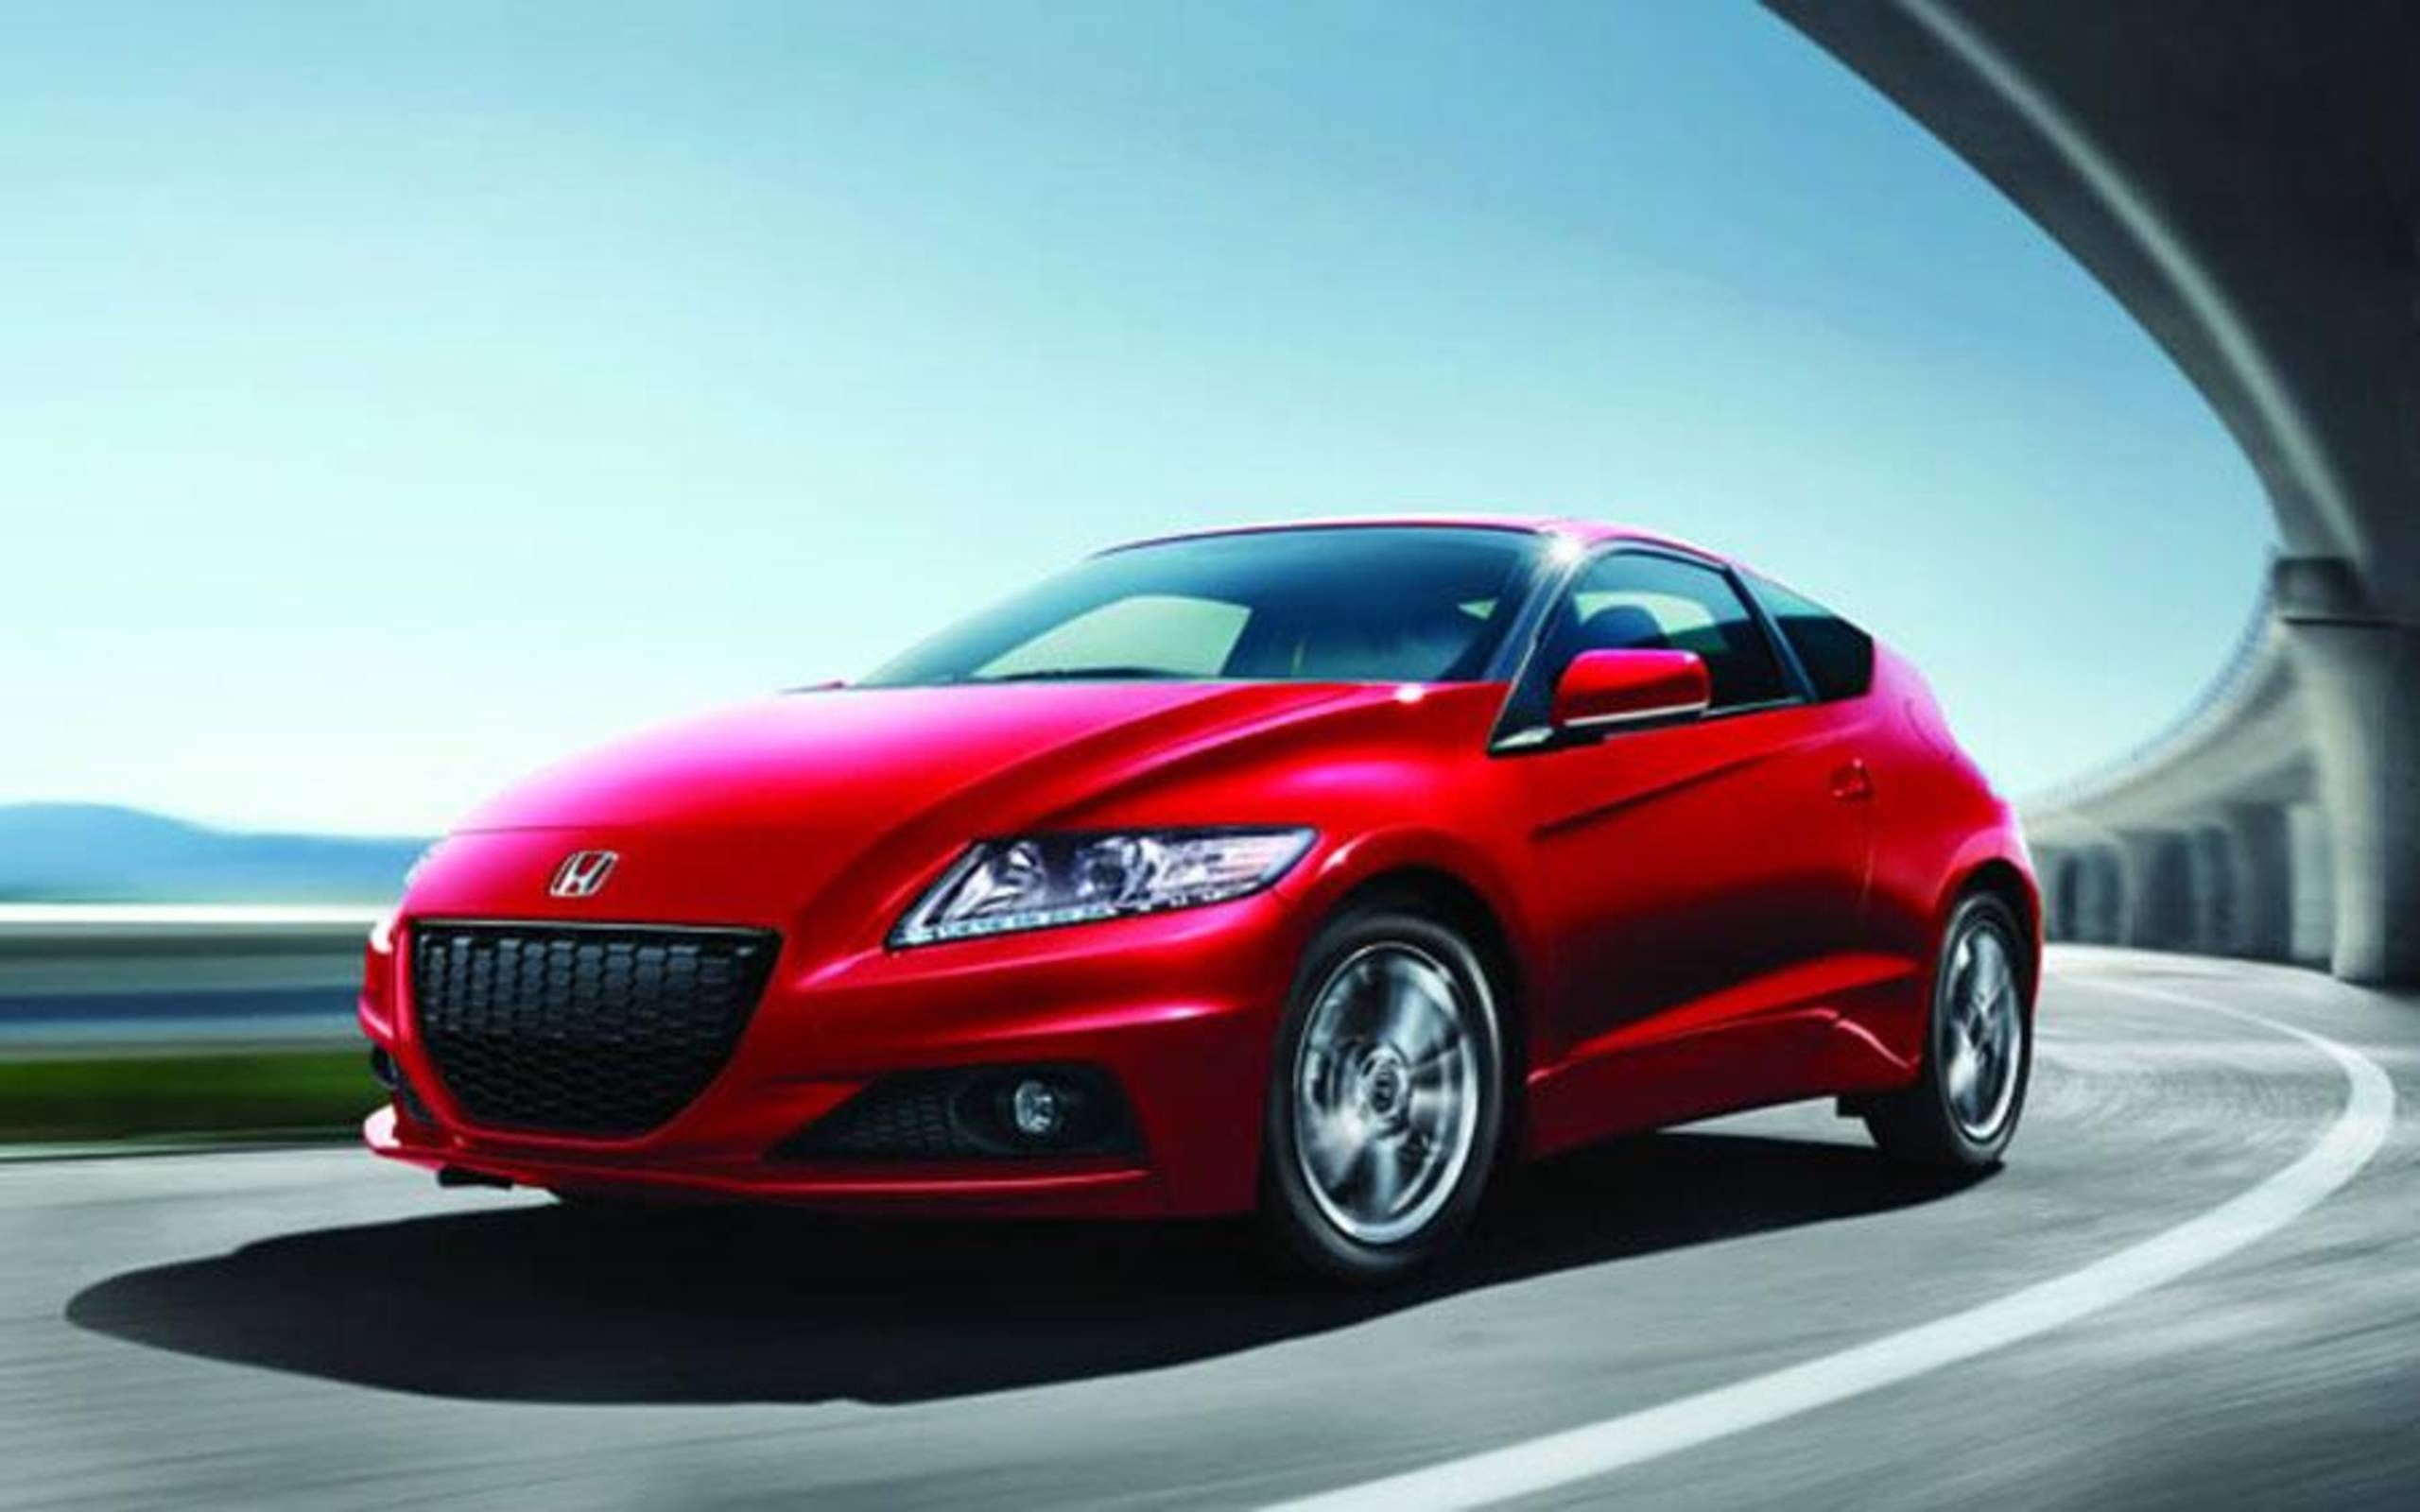 Honda CR-Z gets a modest upgrade for 2013 (pictures) - CNET